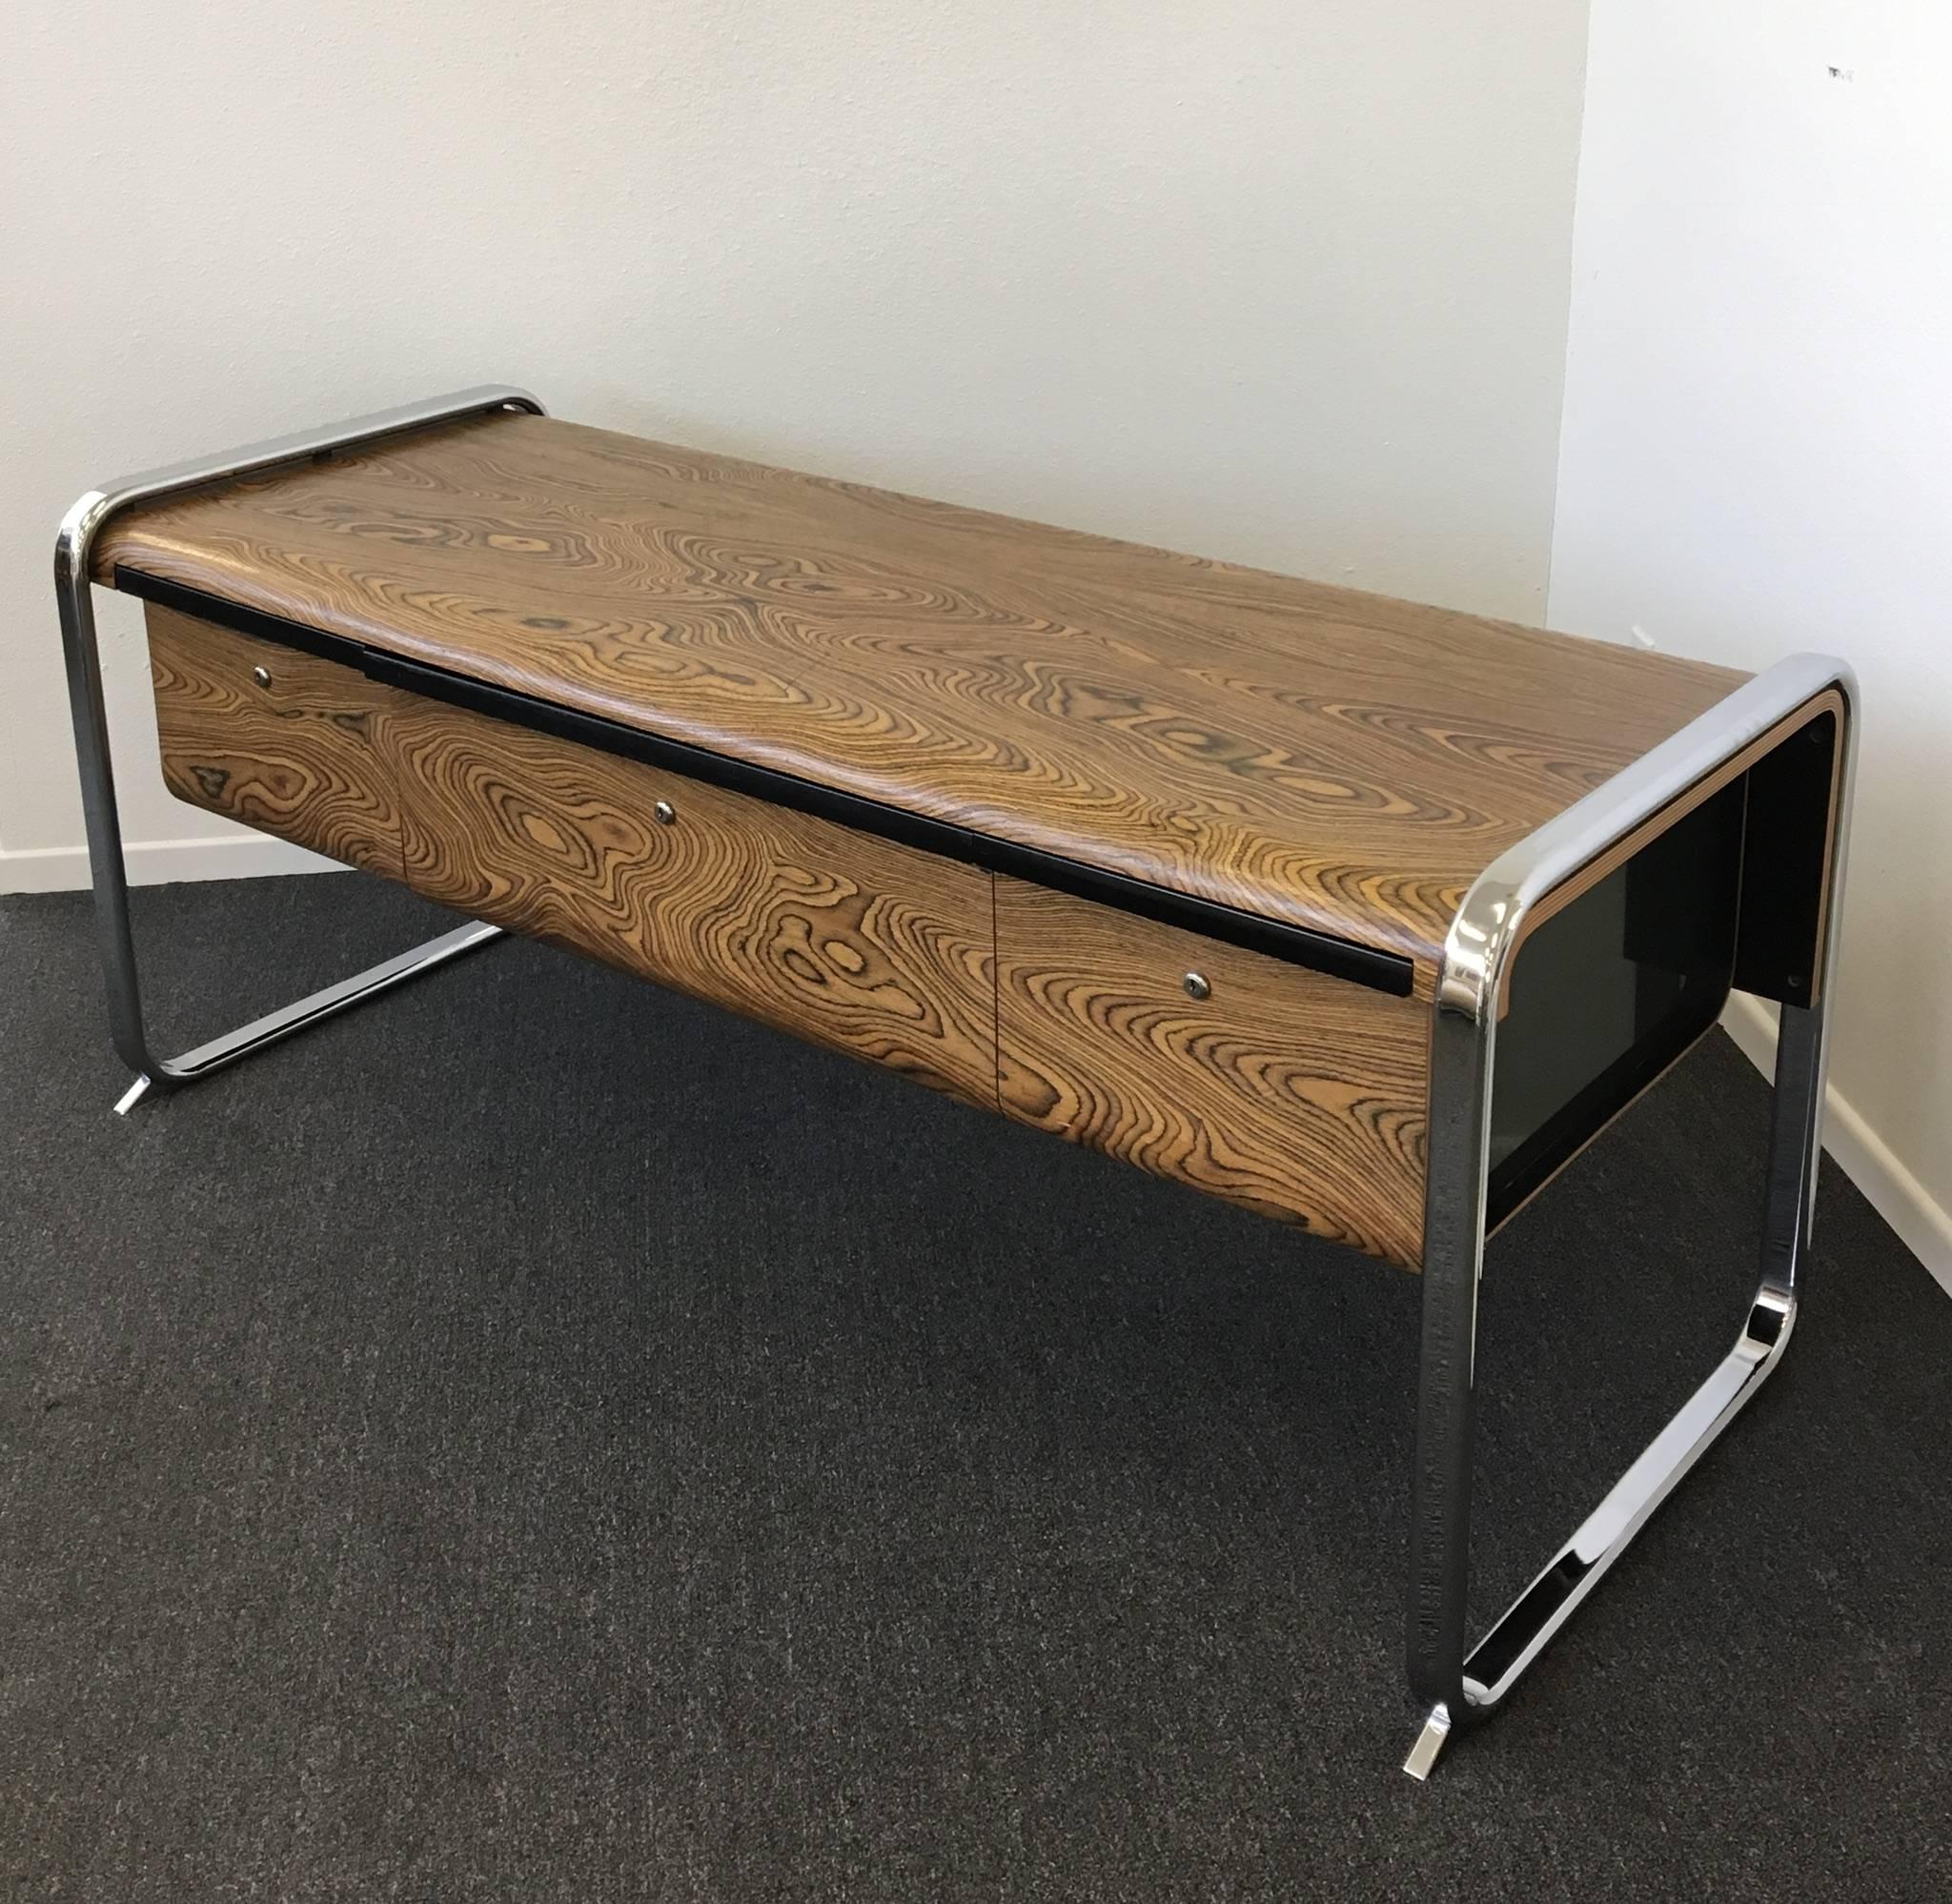 Late 20th Century Zebrawood and Chrome Credenza by Peter Protzman for Herman Miller